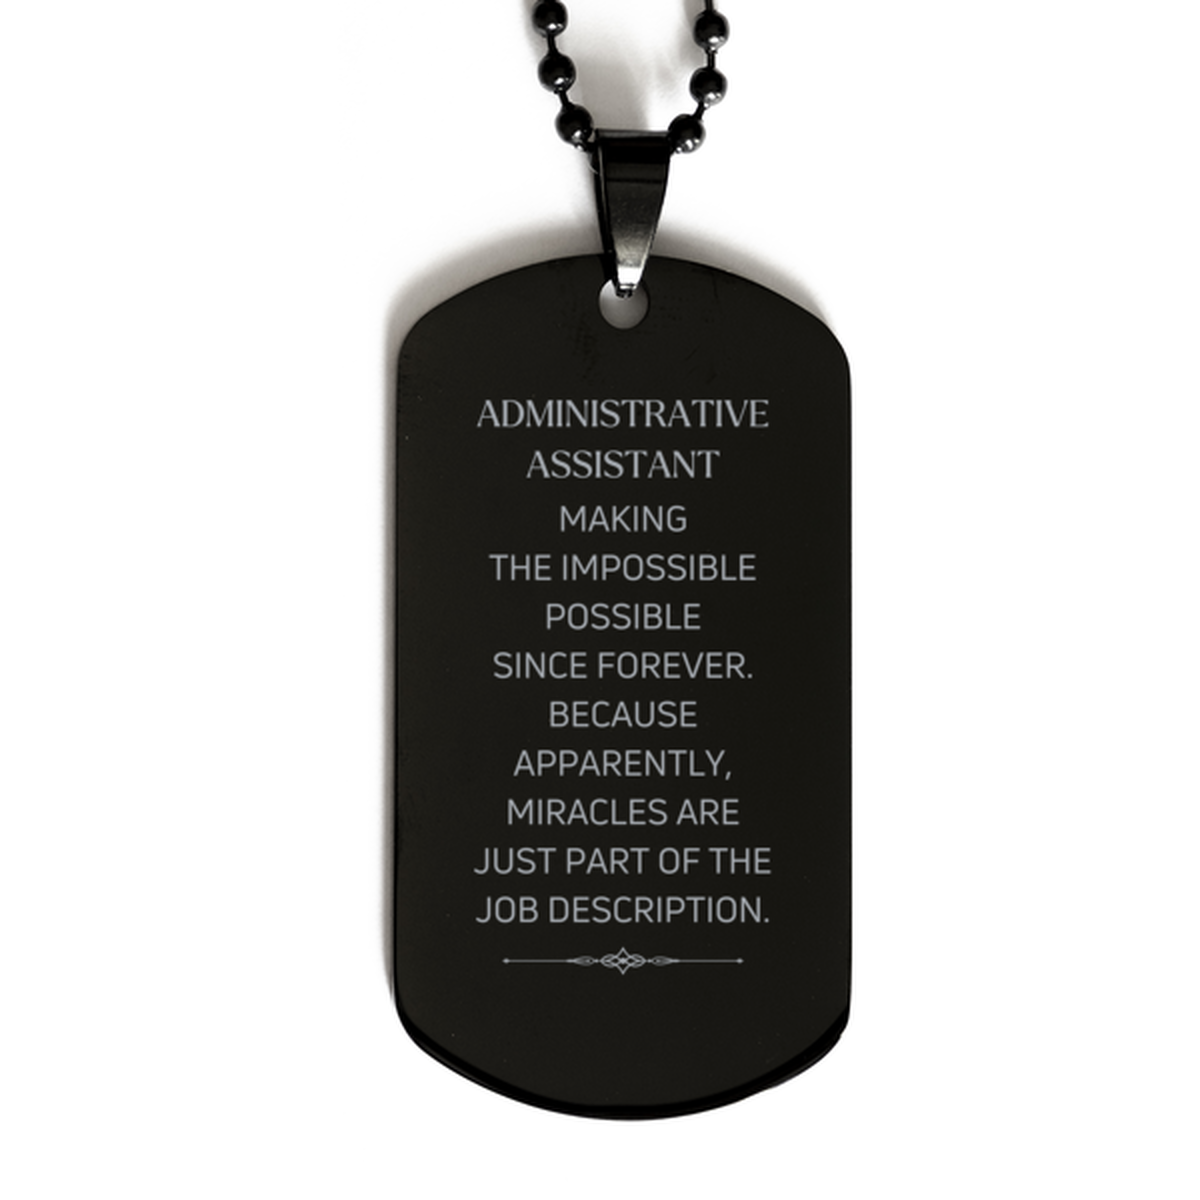 Funny Administrative Assistant Gifts, Miracles are just part of the job description, Inspirational Birthday Black Dog Tag For Administrative Assistant, Men, Women, Coworkers, Friends, Boss